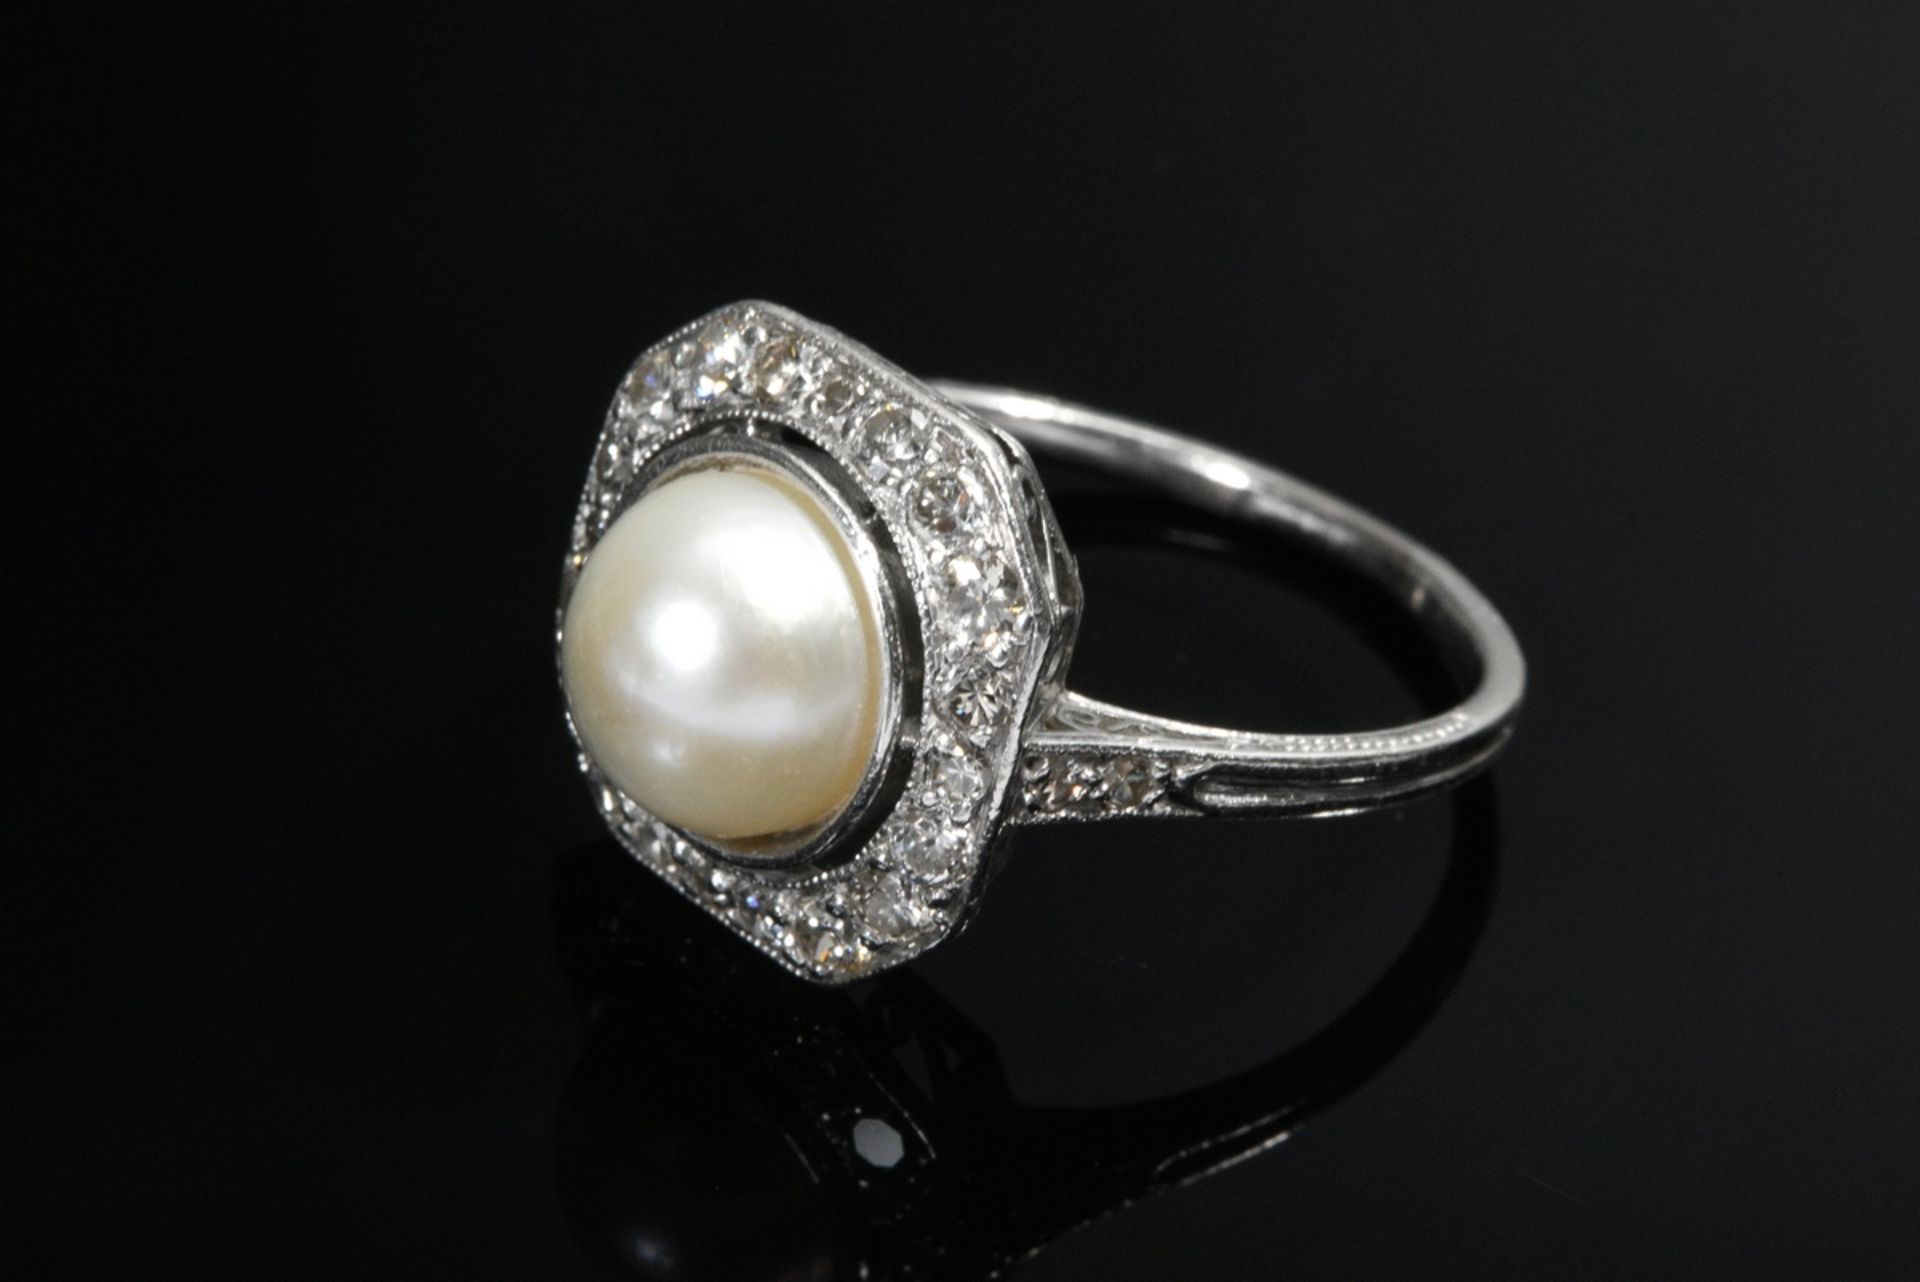 Art Deco platinum ring with cultured pearl in octagonal brilliant-cut diamond bezel and small octag - Image 2 of 4